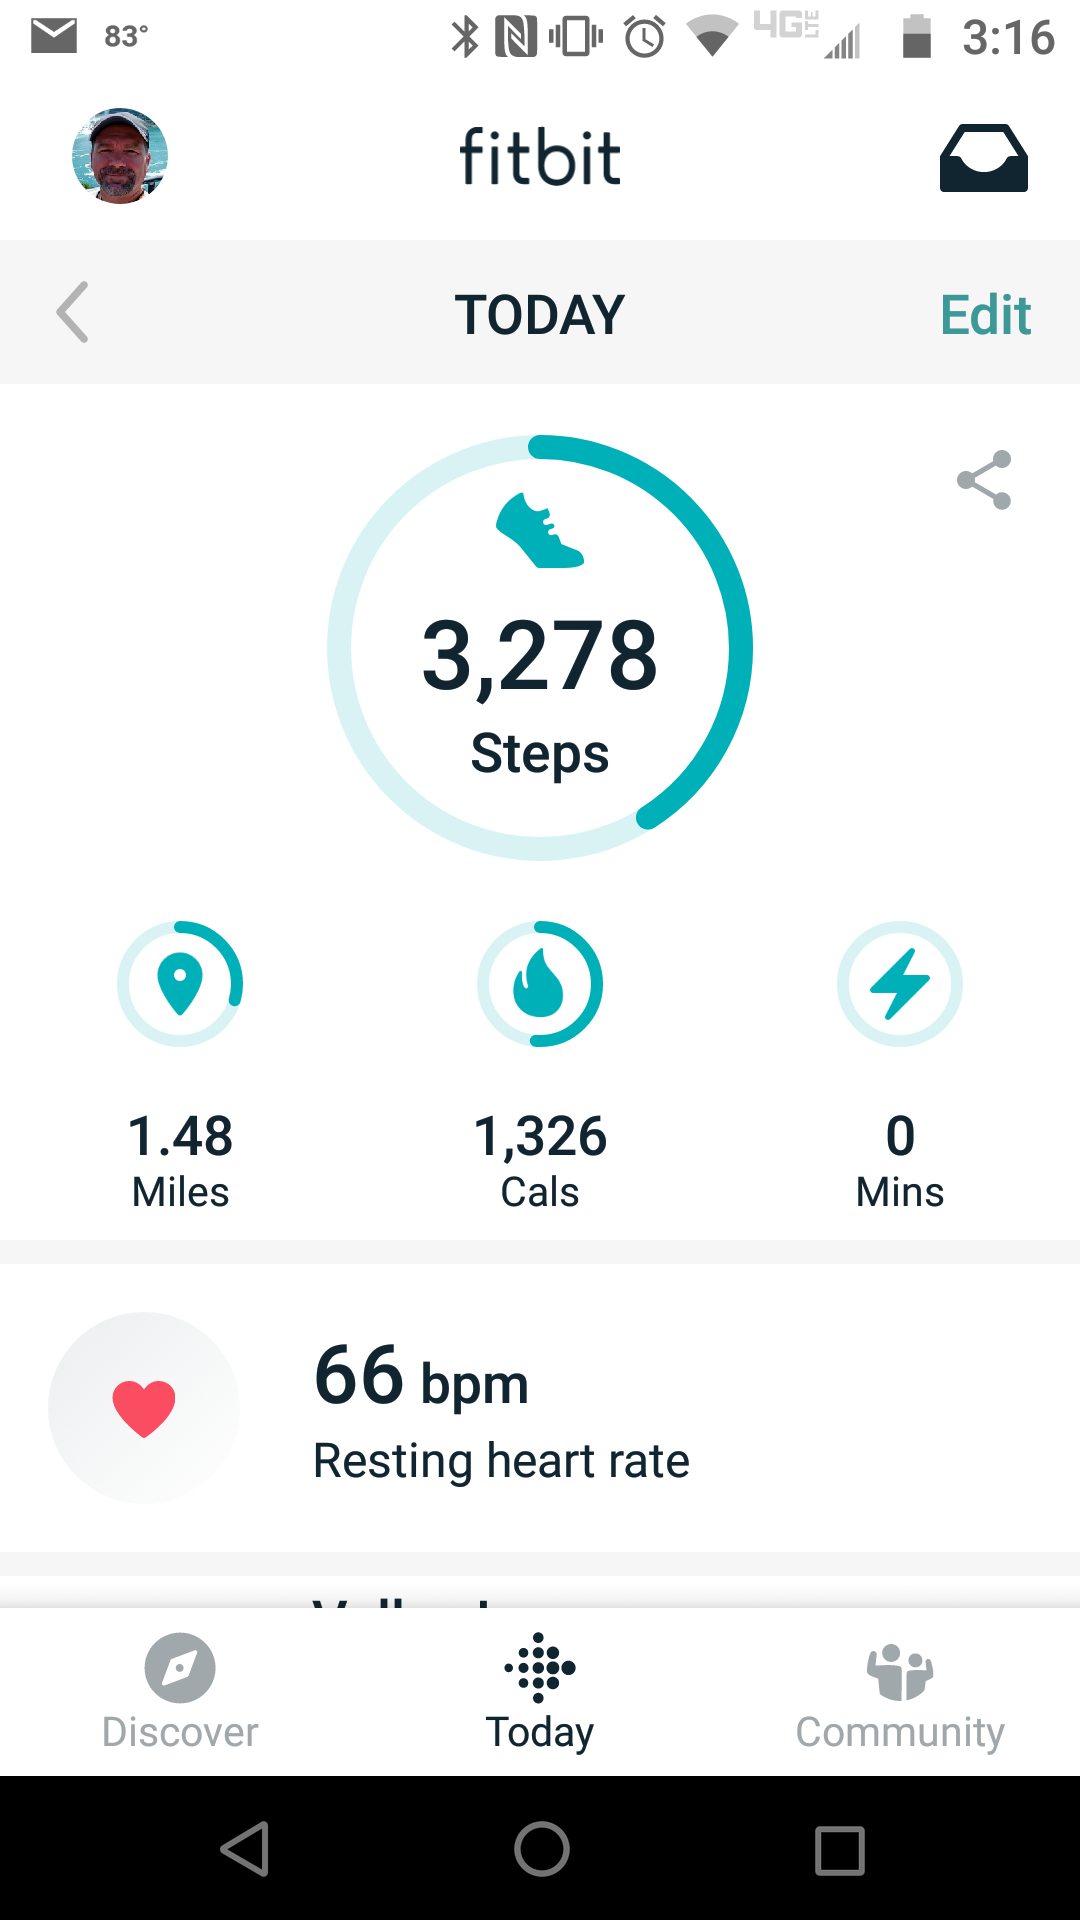 Live heart rate not showing in app 